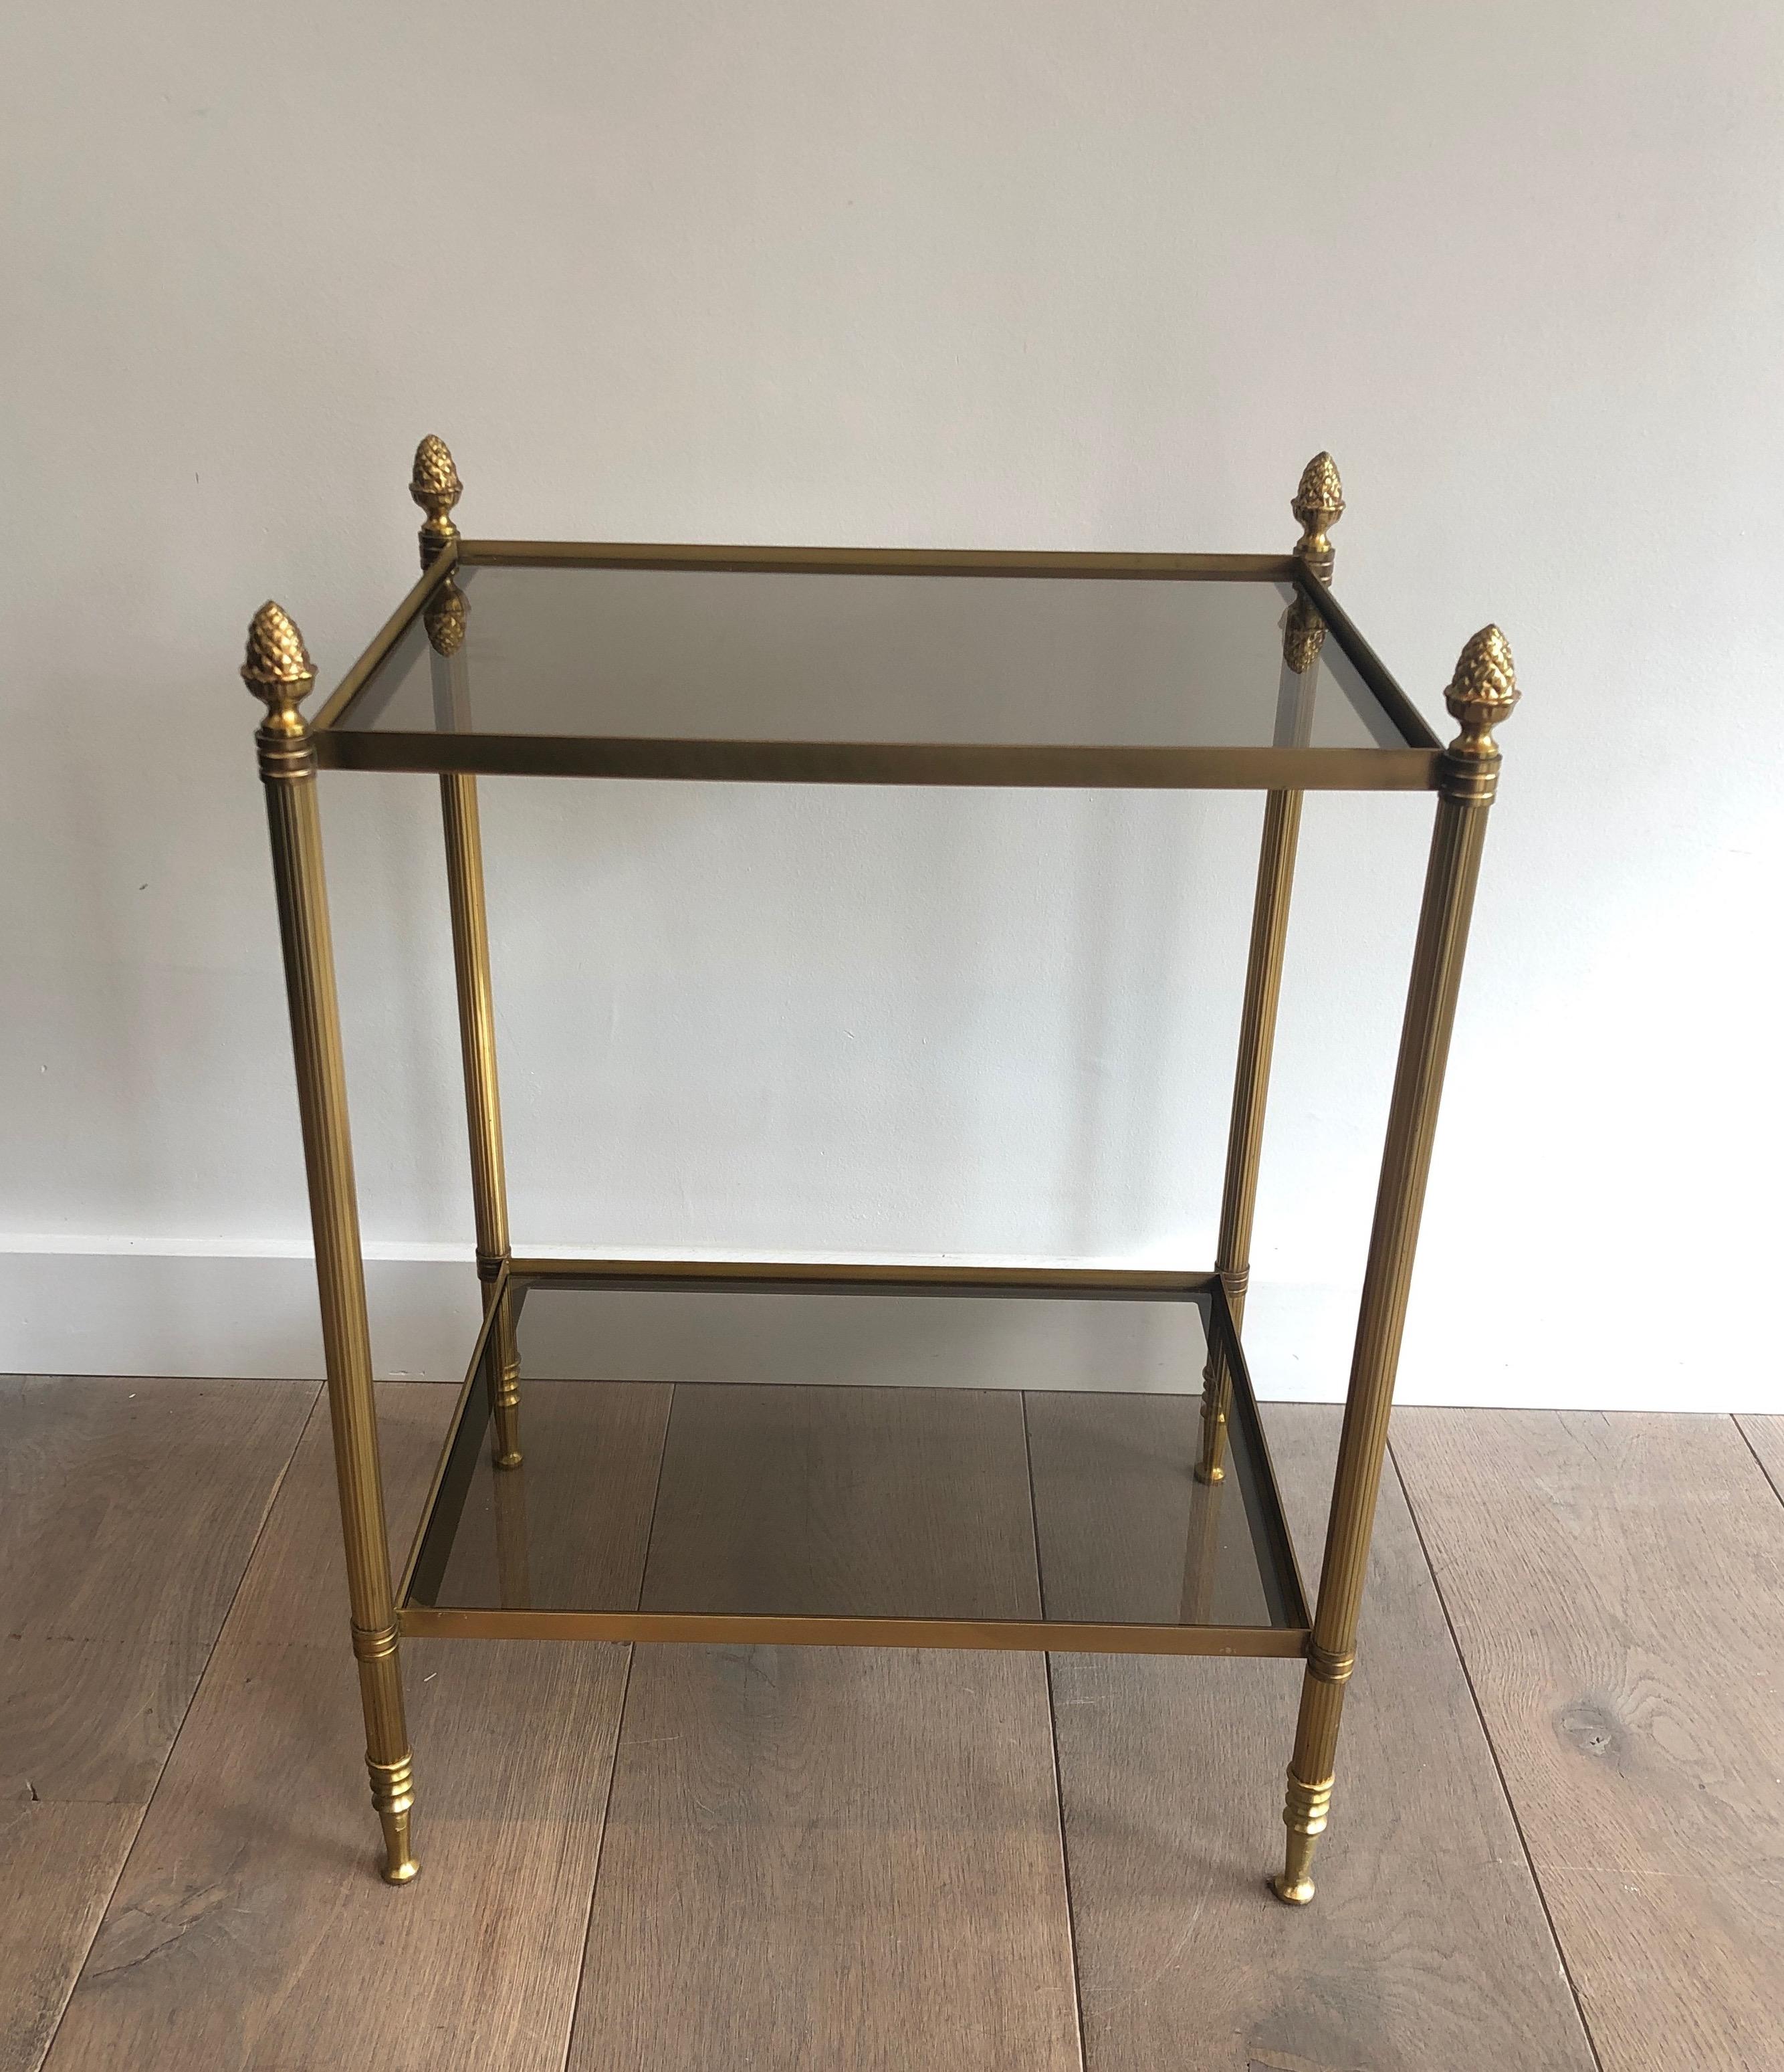 This neoclassical style side table is made of brass with smoked glass shelves. This is a very nice and fine work with fluted legs and nice chiseled finials on each corner. This work is by famous French designer Maison Baguès, circa 1940.